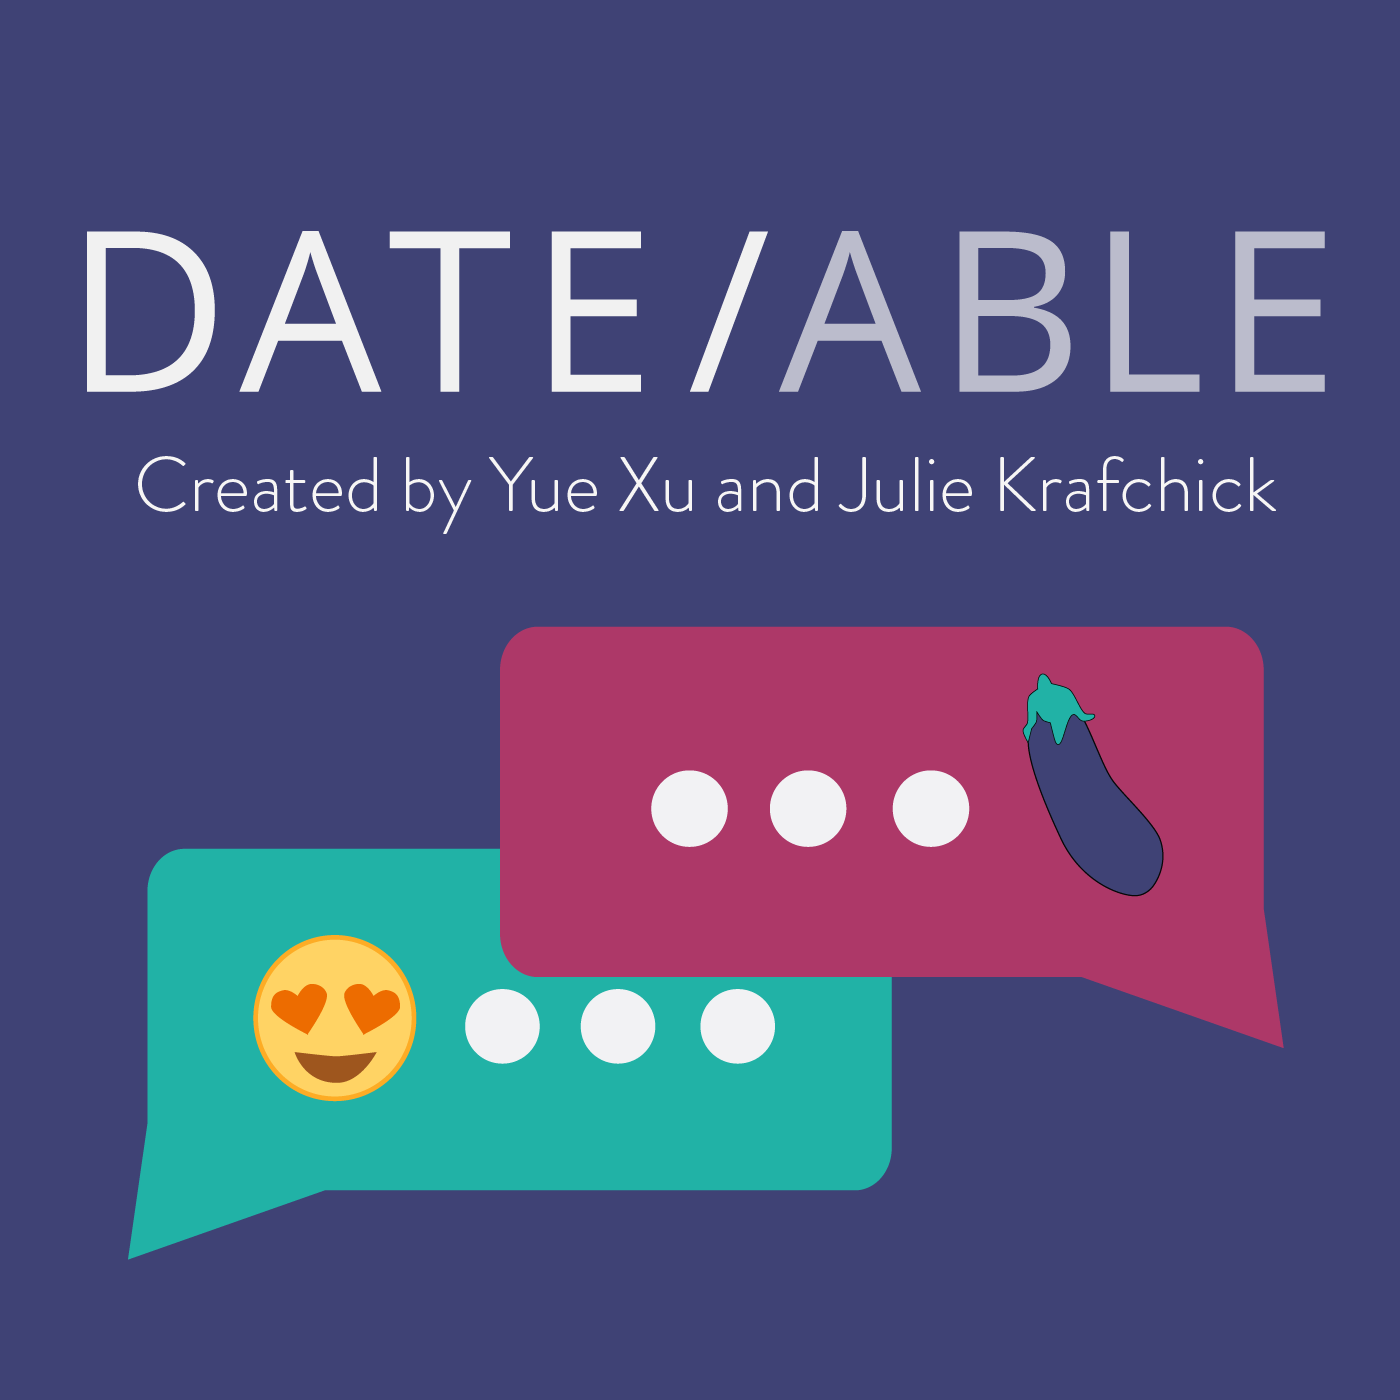 Fresh update on "50 k f" discussed on Dateable Podcast